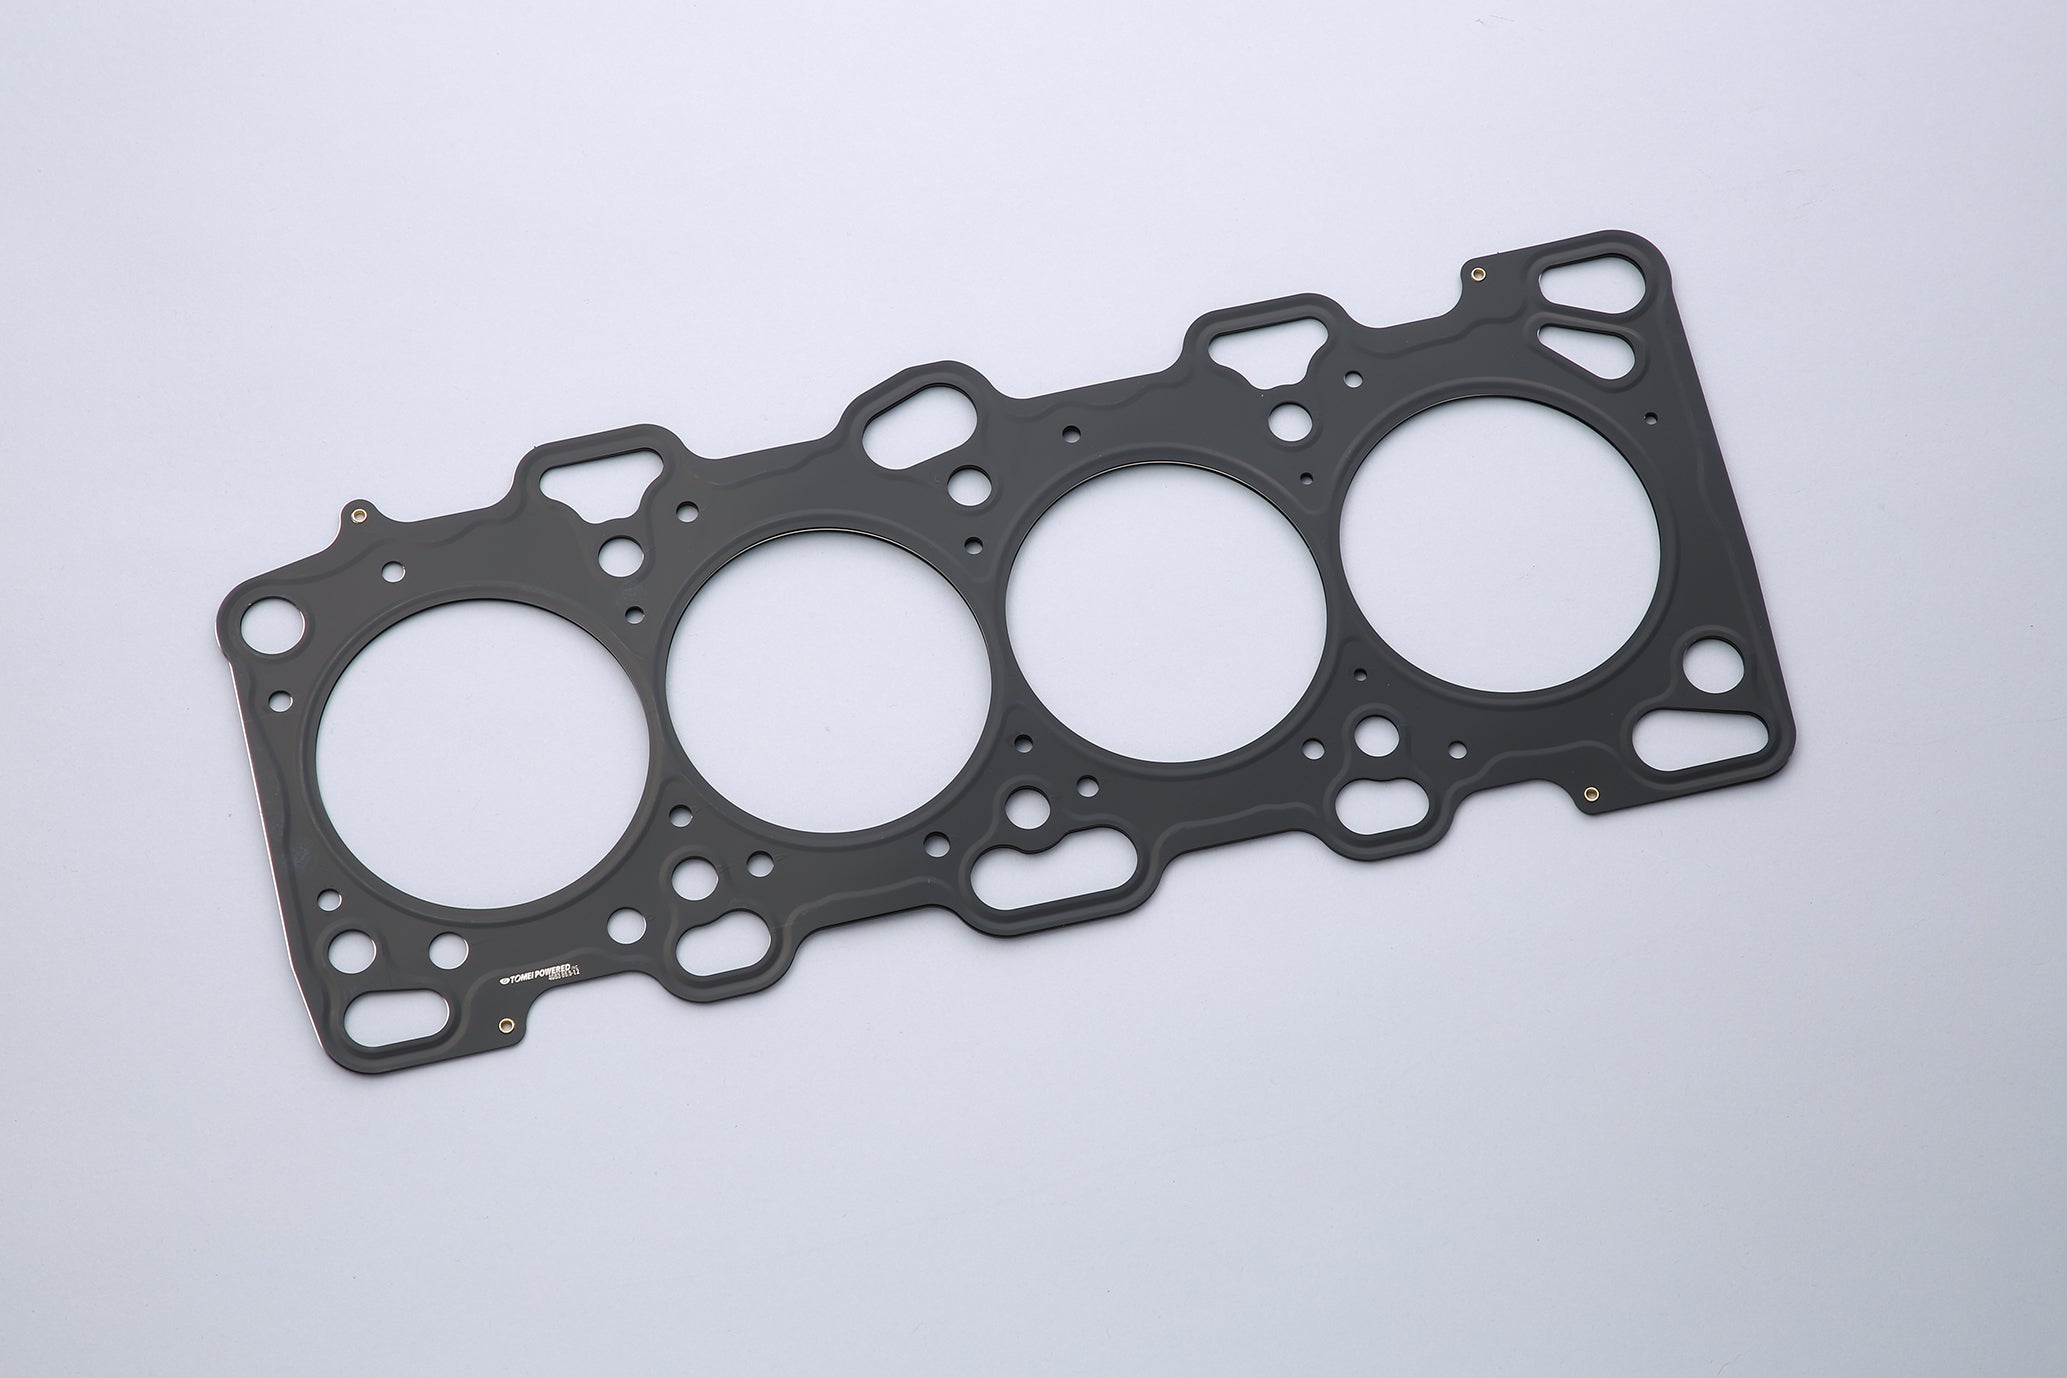 4G63 (EVO IV) Engine Rebuild Package - CP Pistons, Manley Rods & Tomei 1.5mm Head Gasket - 9.0:1 CR